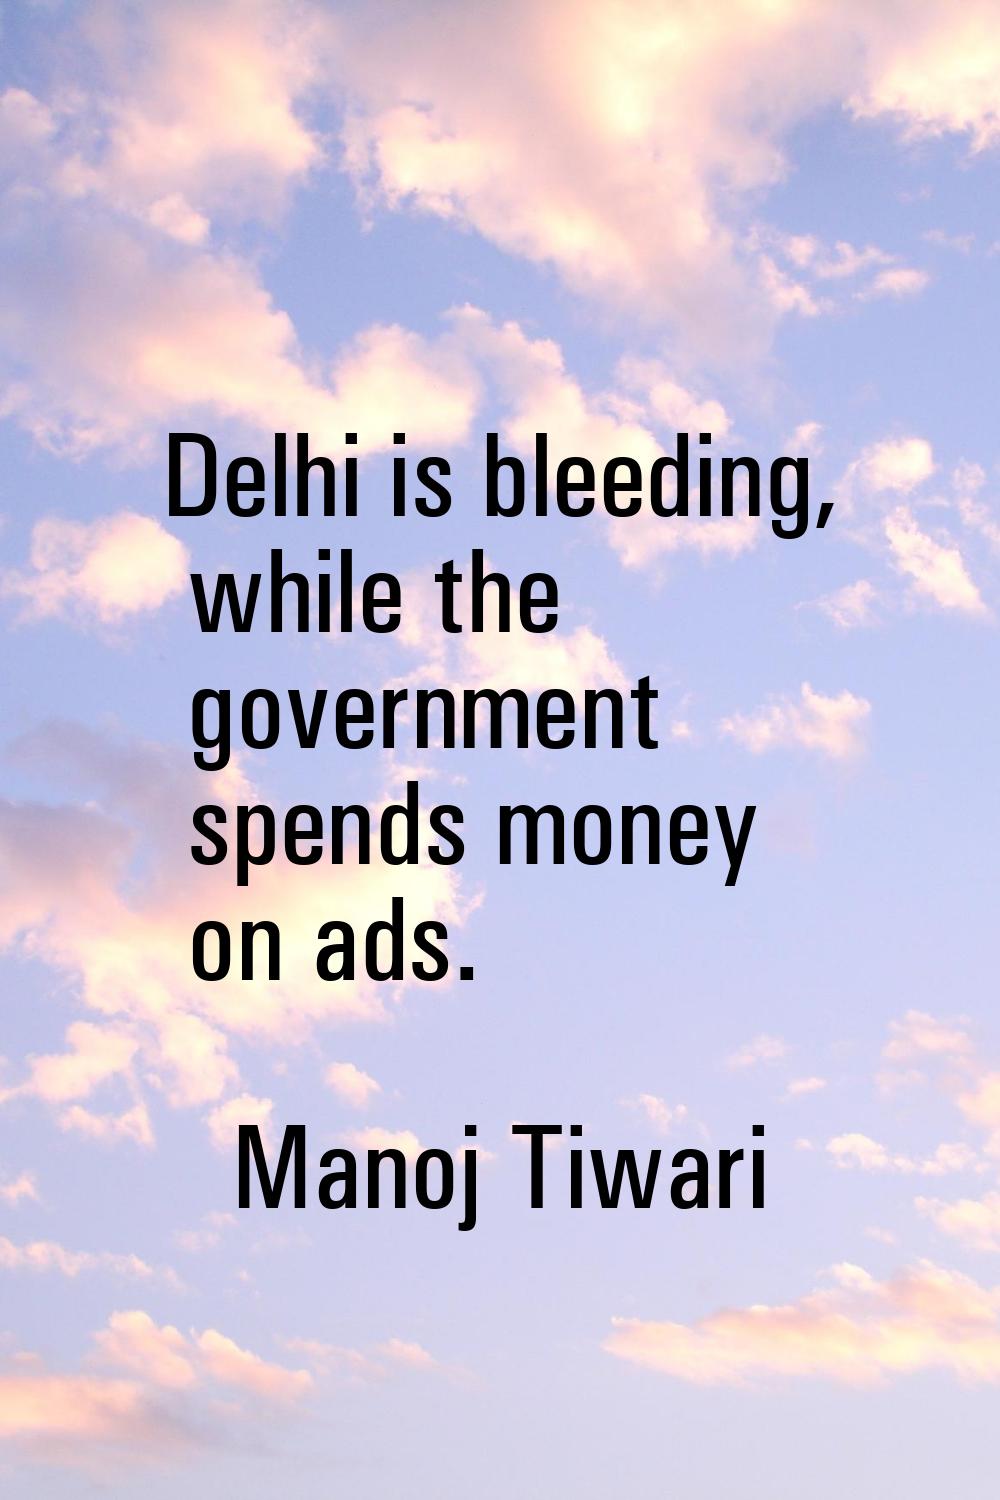 Delhi is bleeding, while the government spends money on ads.